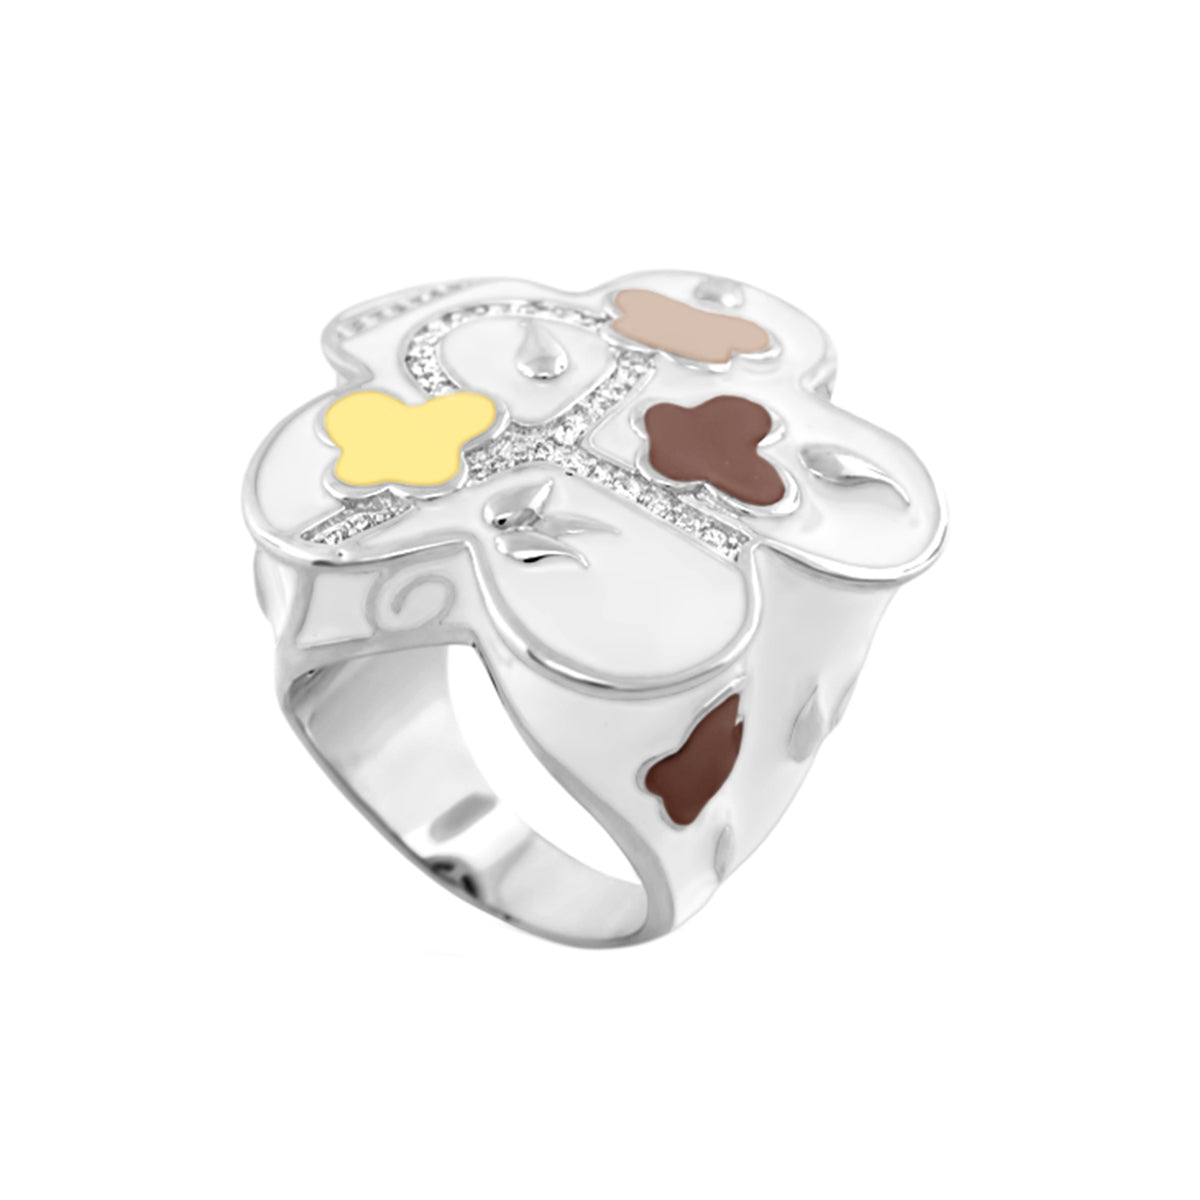 You Neek Cocktail Ring